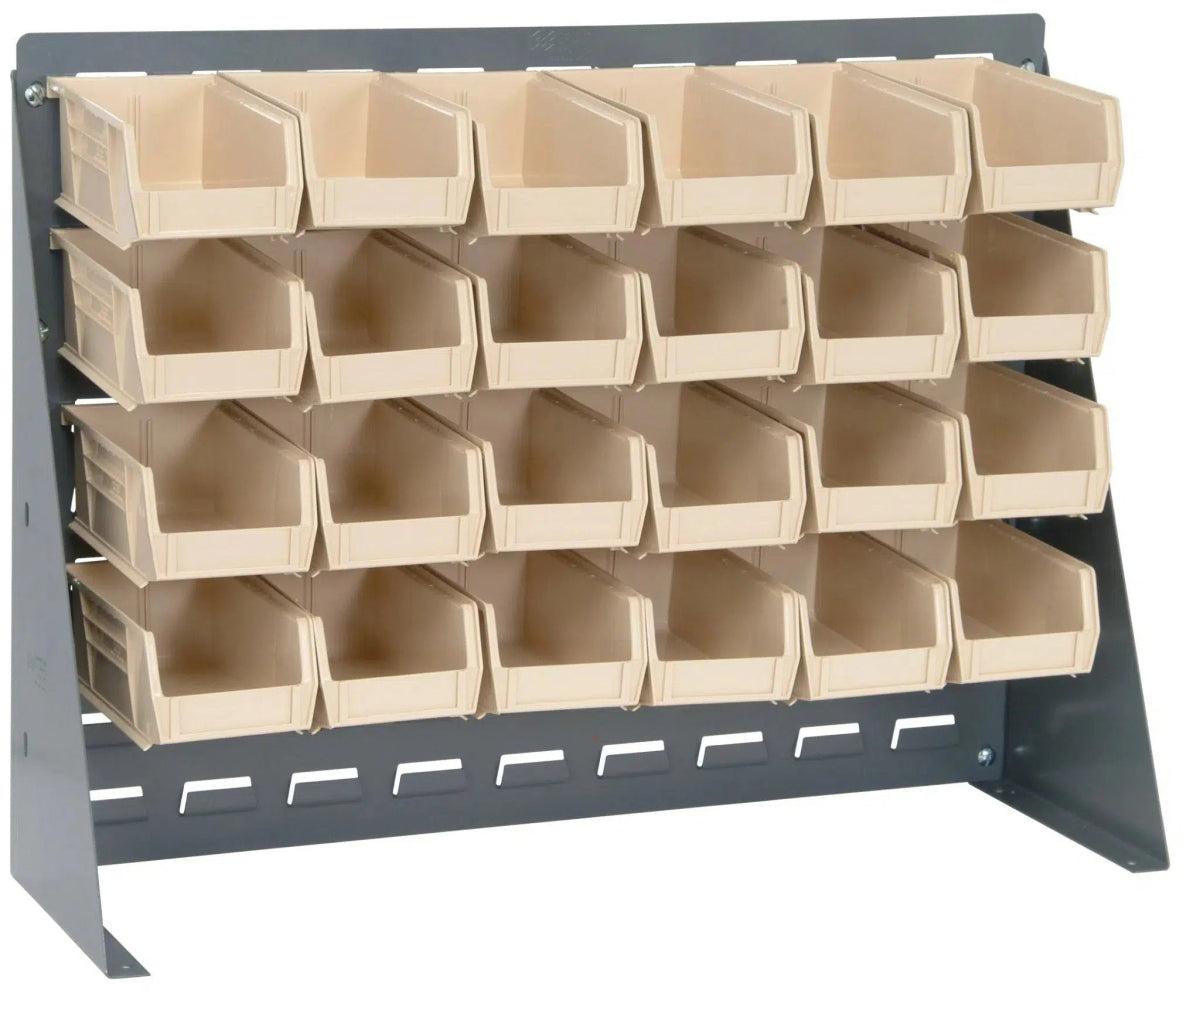 QBR-2721-220-24 | Bench Rack with 24 Hanging Bins - Industrial 4 Less - QBR-2721-220-24-IV